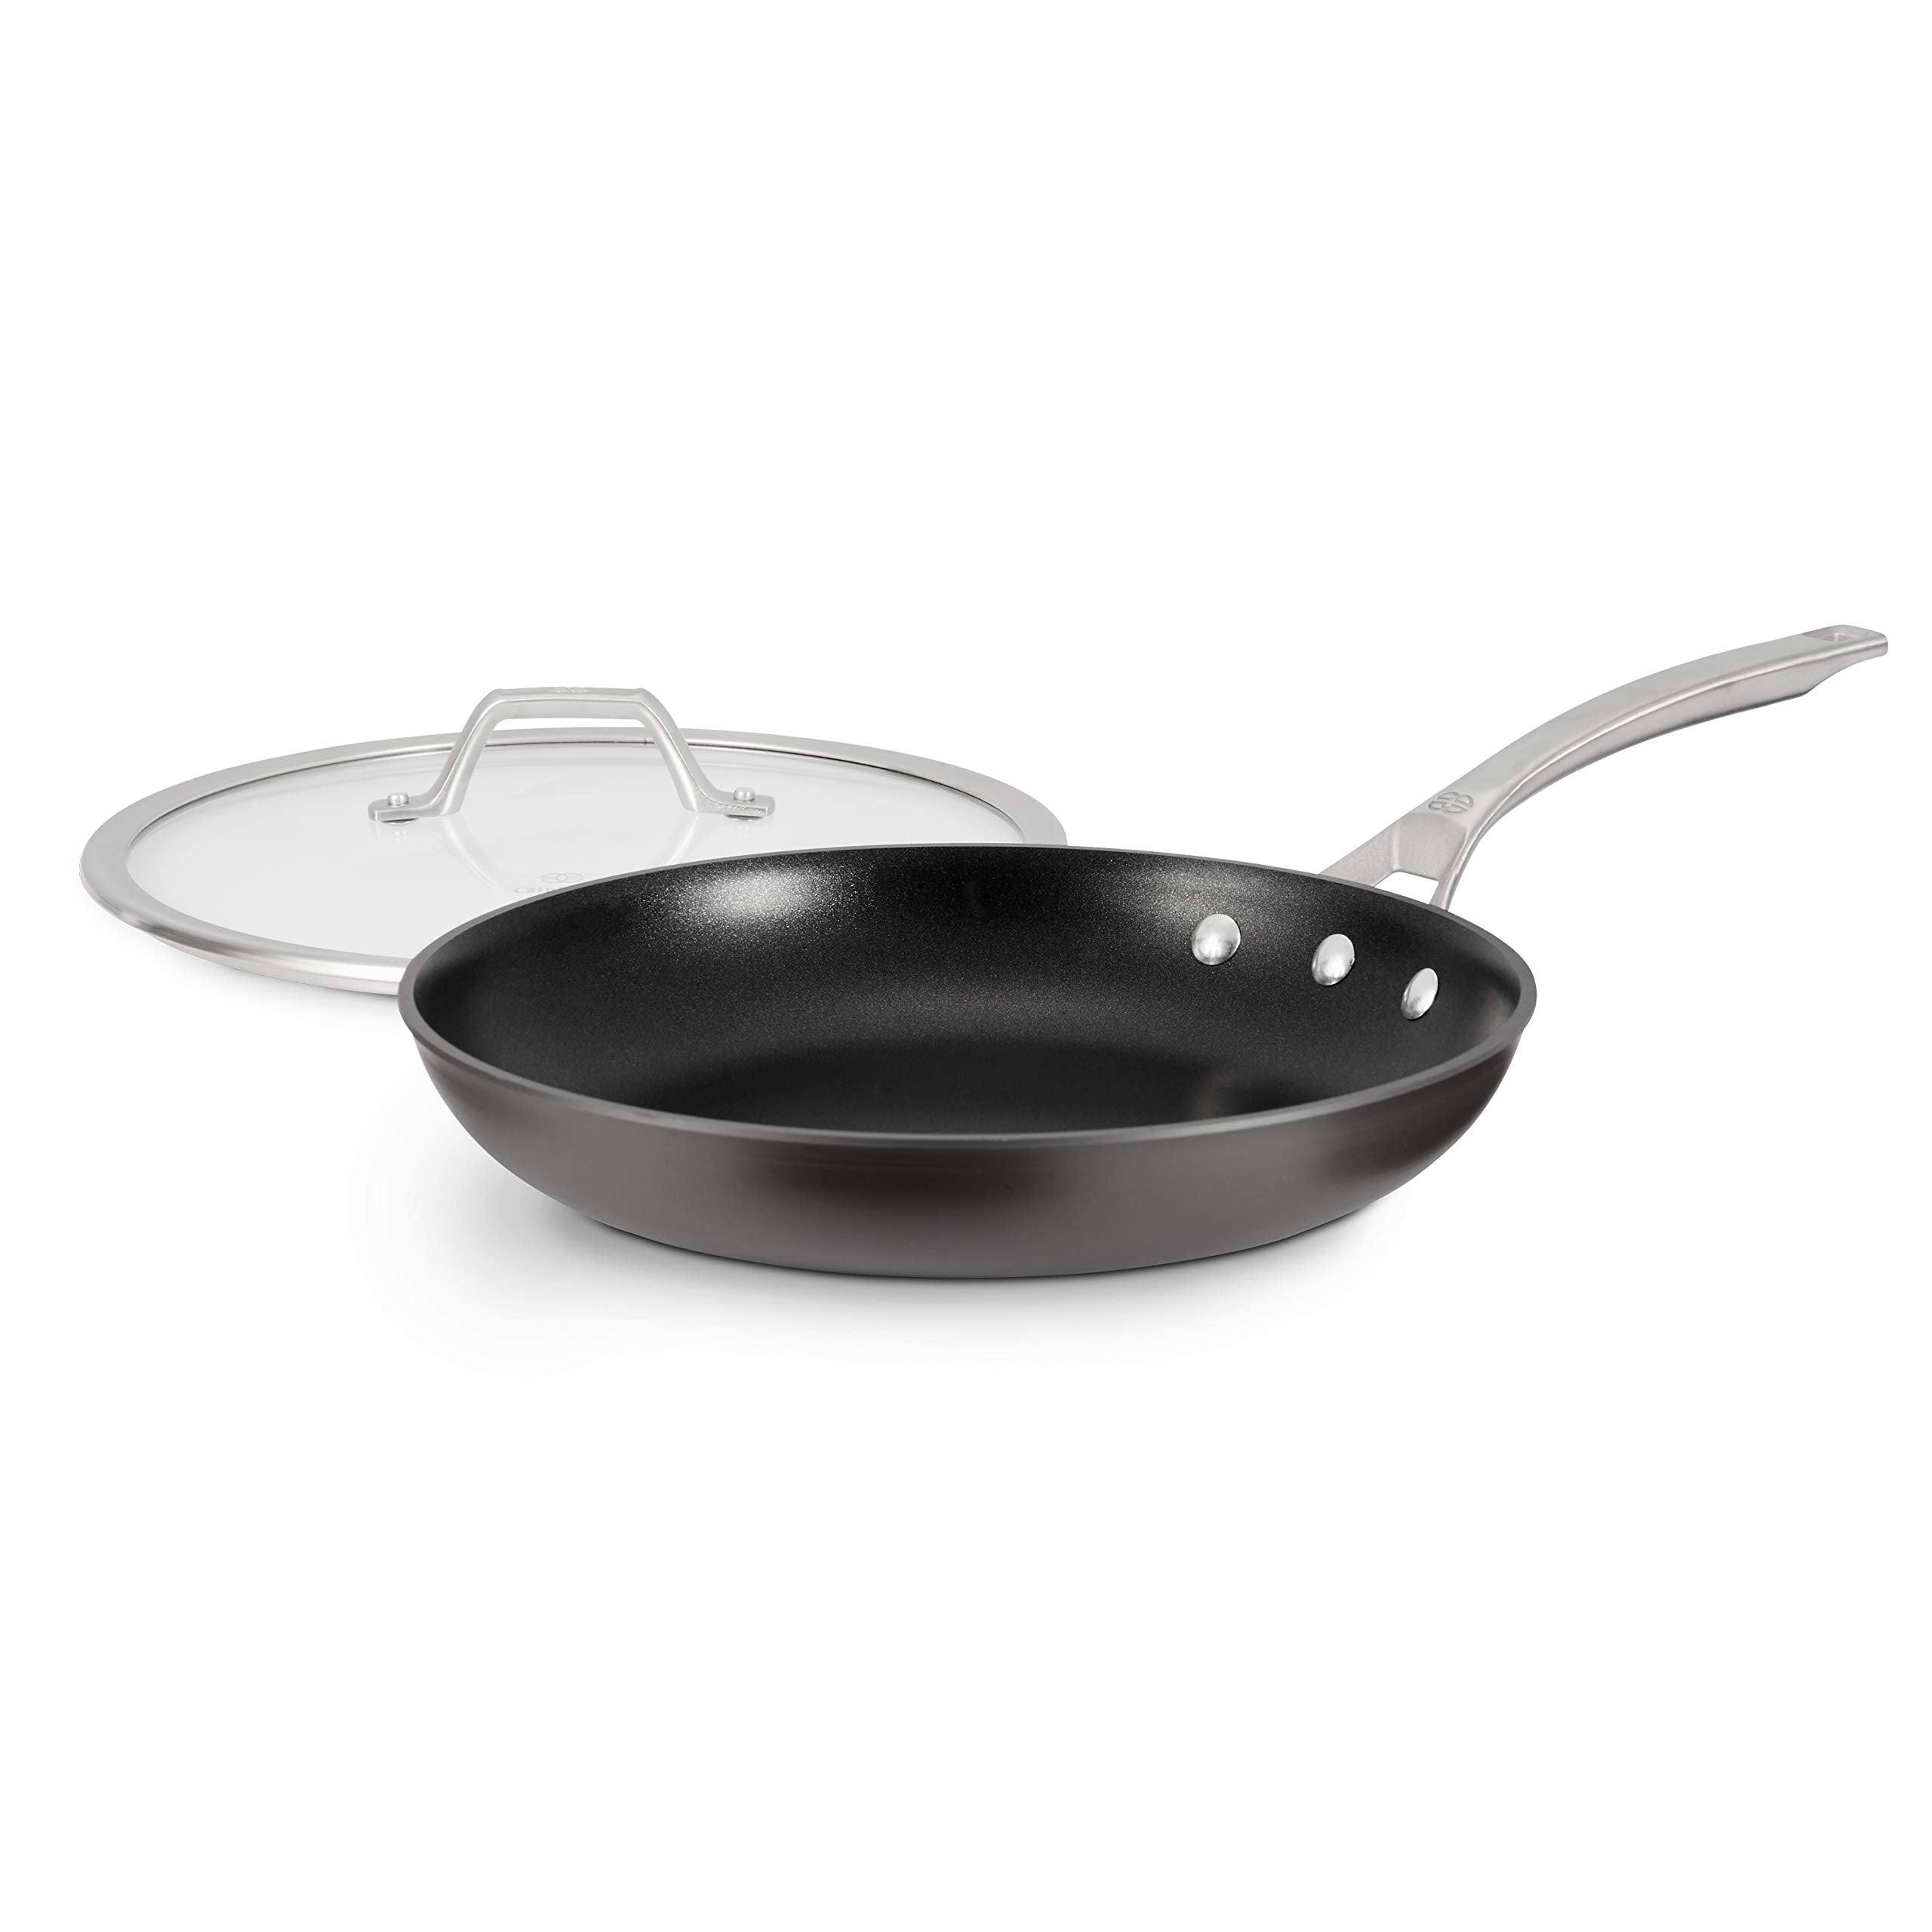 Calphalon Nonstick Frying Pan with Lid and Stay-Cool Handles, Dishwasher and Metal Utensil Safe, PFOA-Free, 12-Inch, Black